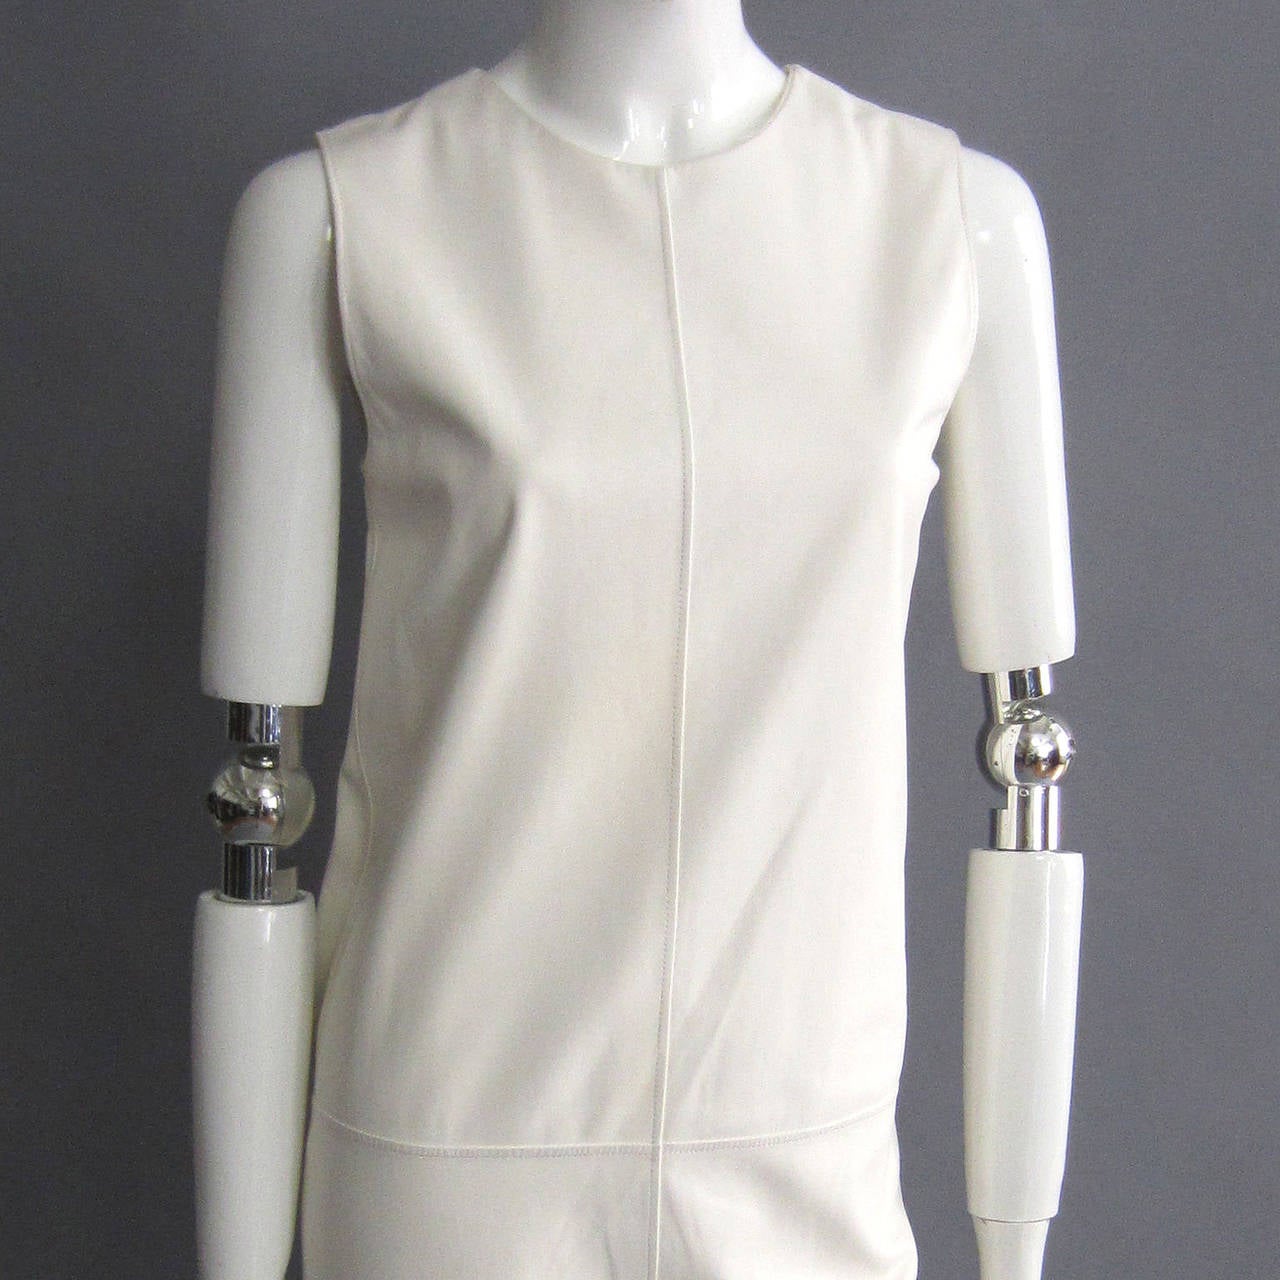 The beautiful white leather of this dress embodies the quality and rich history of HERMES. The subtle leather is soft to the touch, but it is also sturdy, forming the stiff, 60s inspired, shift silhouette. The clean white is modern and classic. A